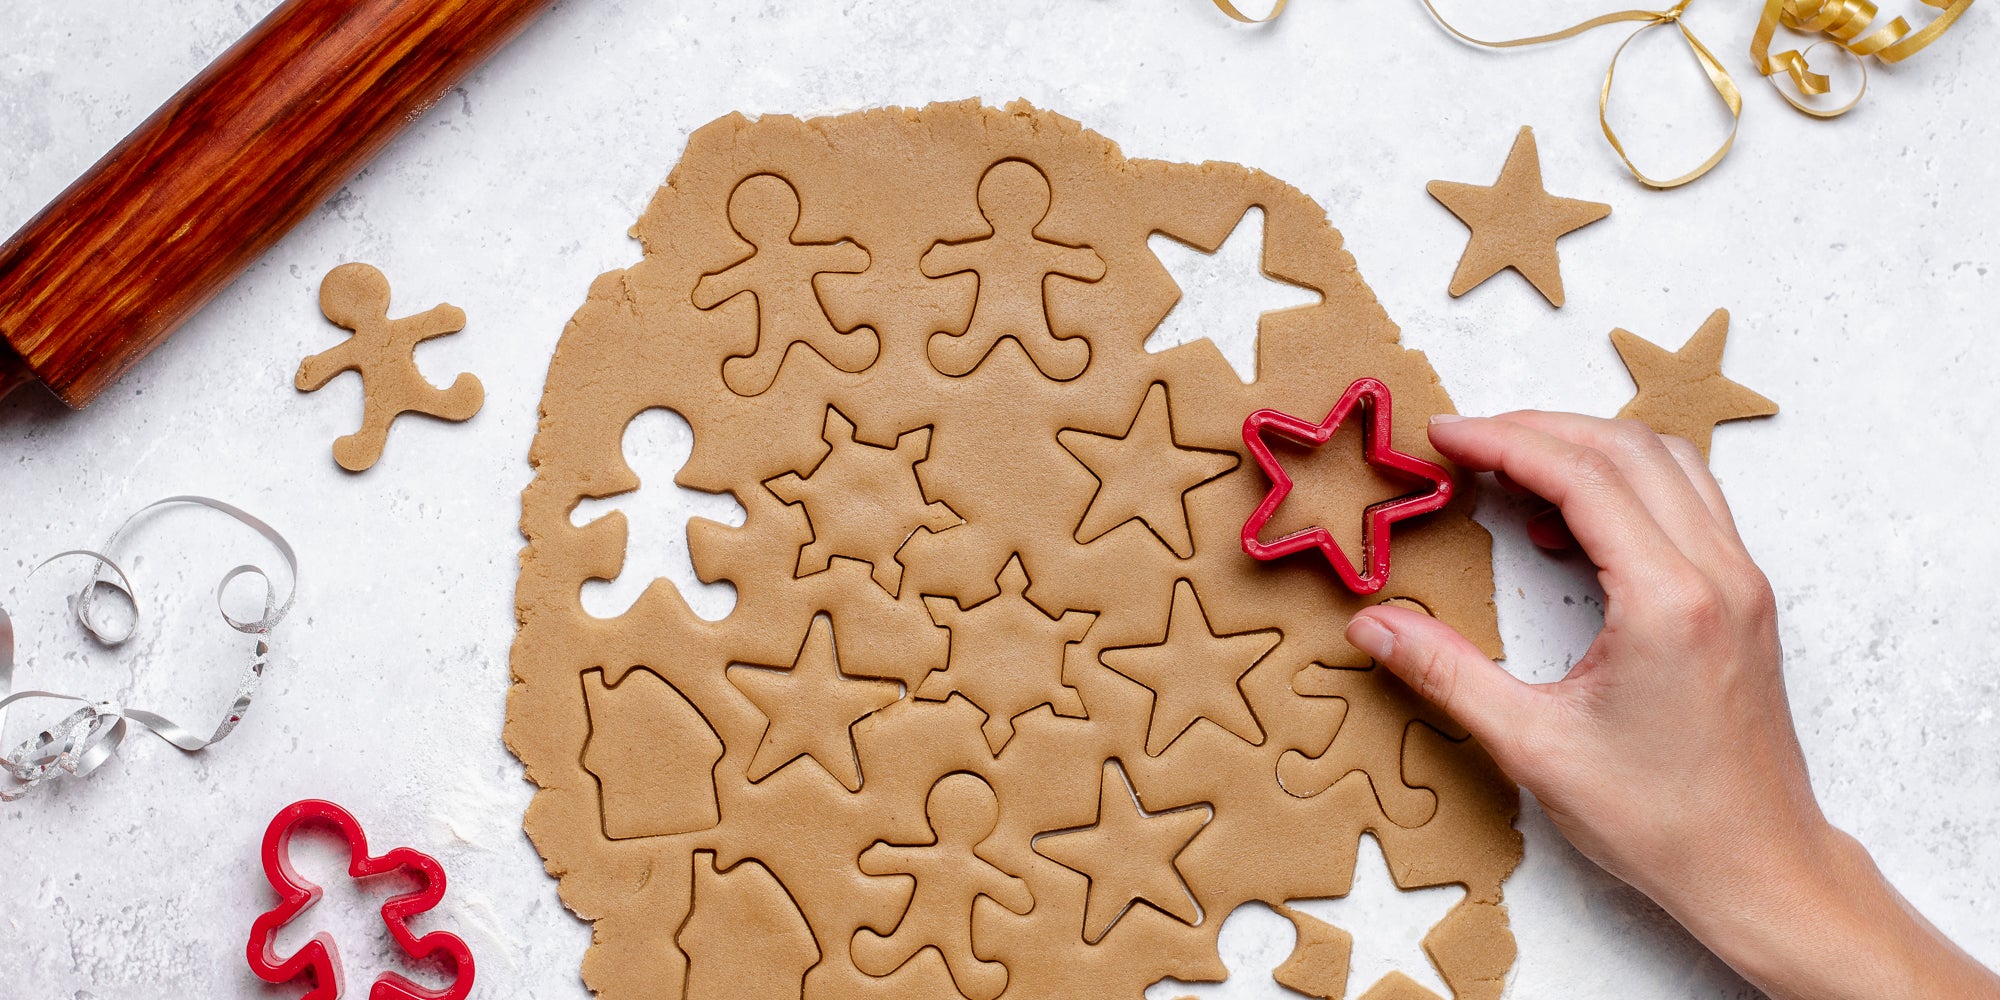 Top view of rolled out Gingerbread Dough with a hand cutting shapes out of it, next to a rolling pin and cut out gingerbread men and stars